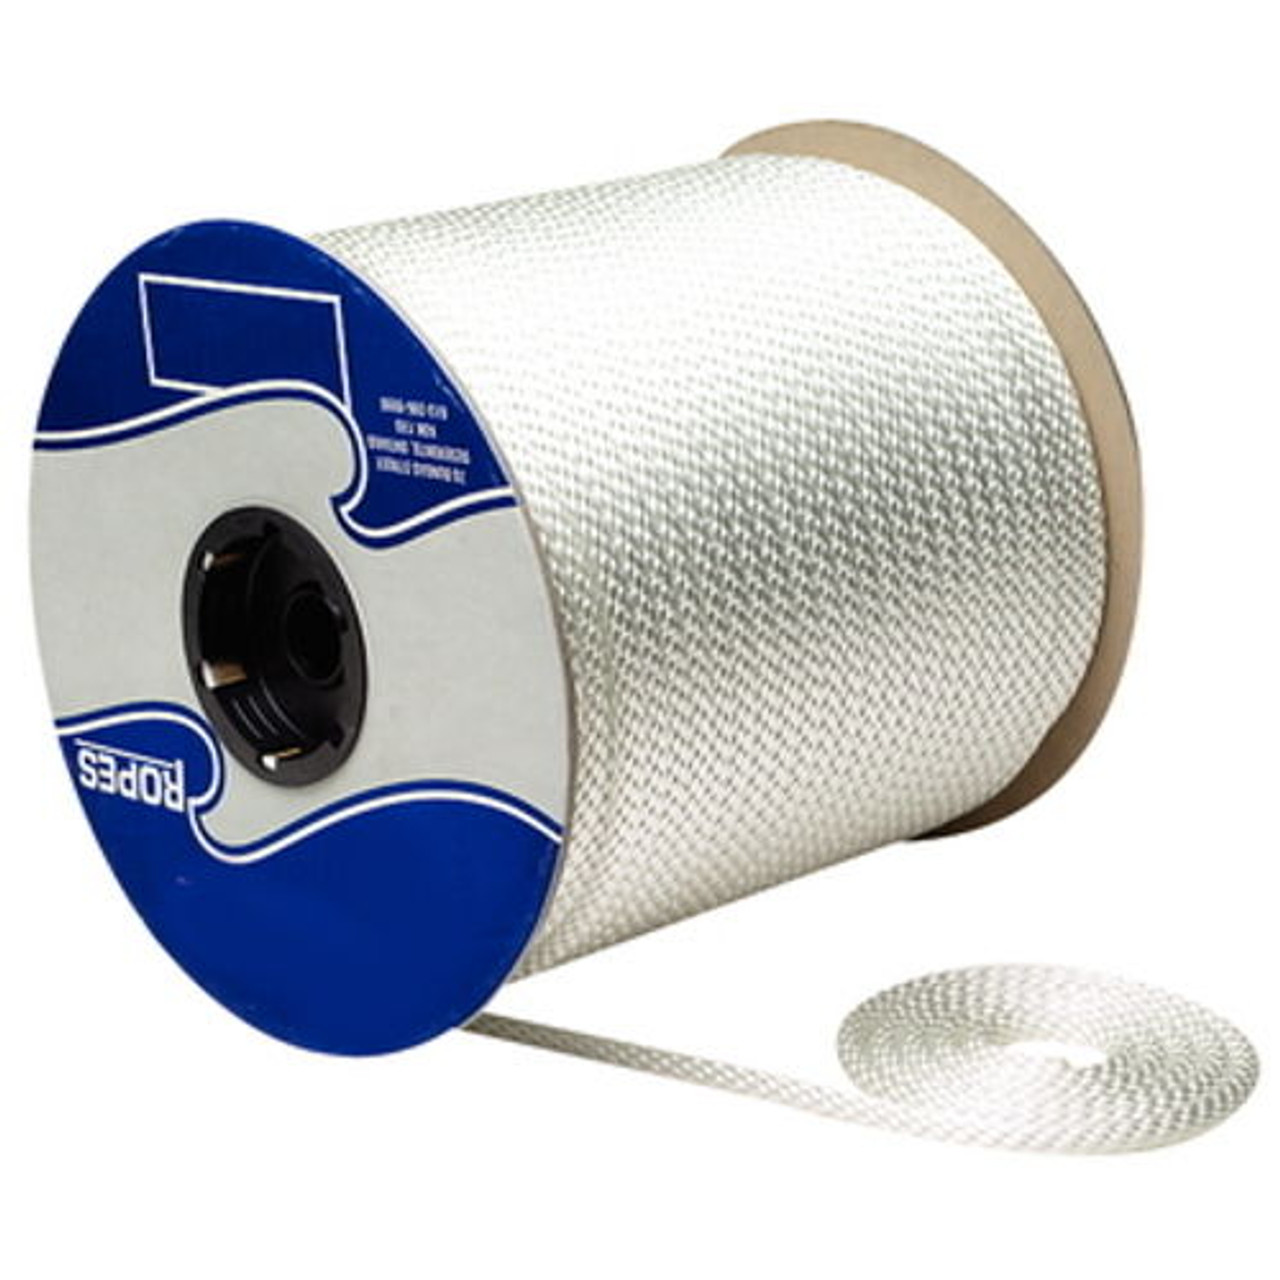 3/16 Inch x 1,000 Ft White Solid Braid Nylon Rope Spool for Boats